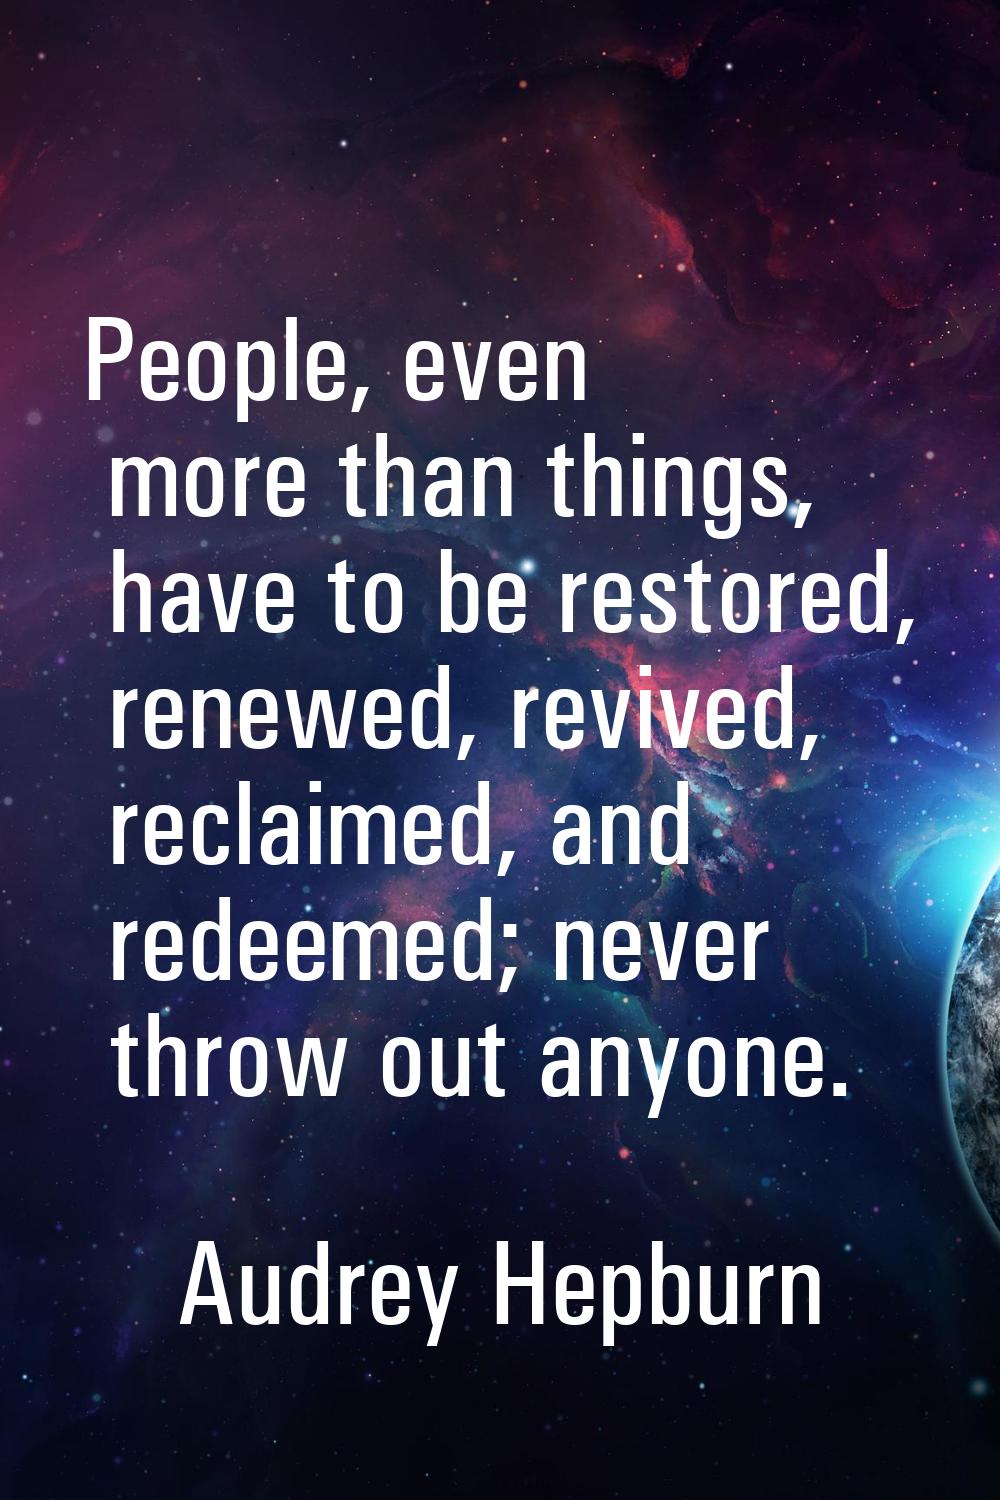 People, even more than things, have to be restored, renewed, revived, reclaimed, and redeemed; neve